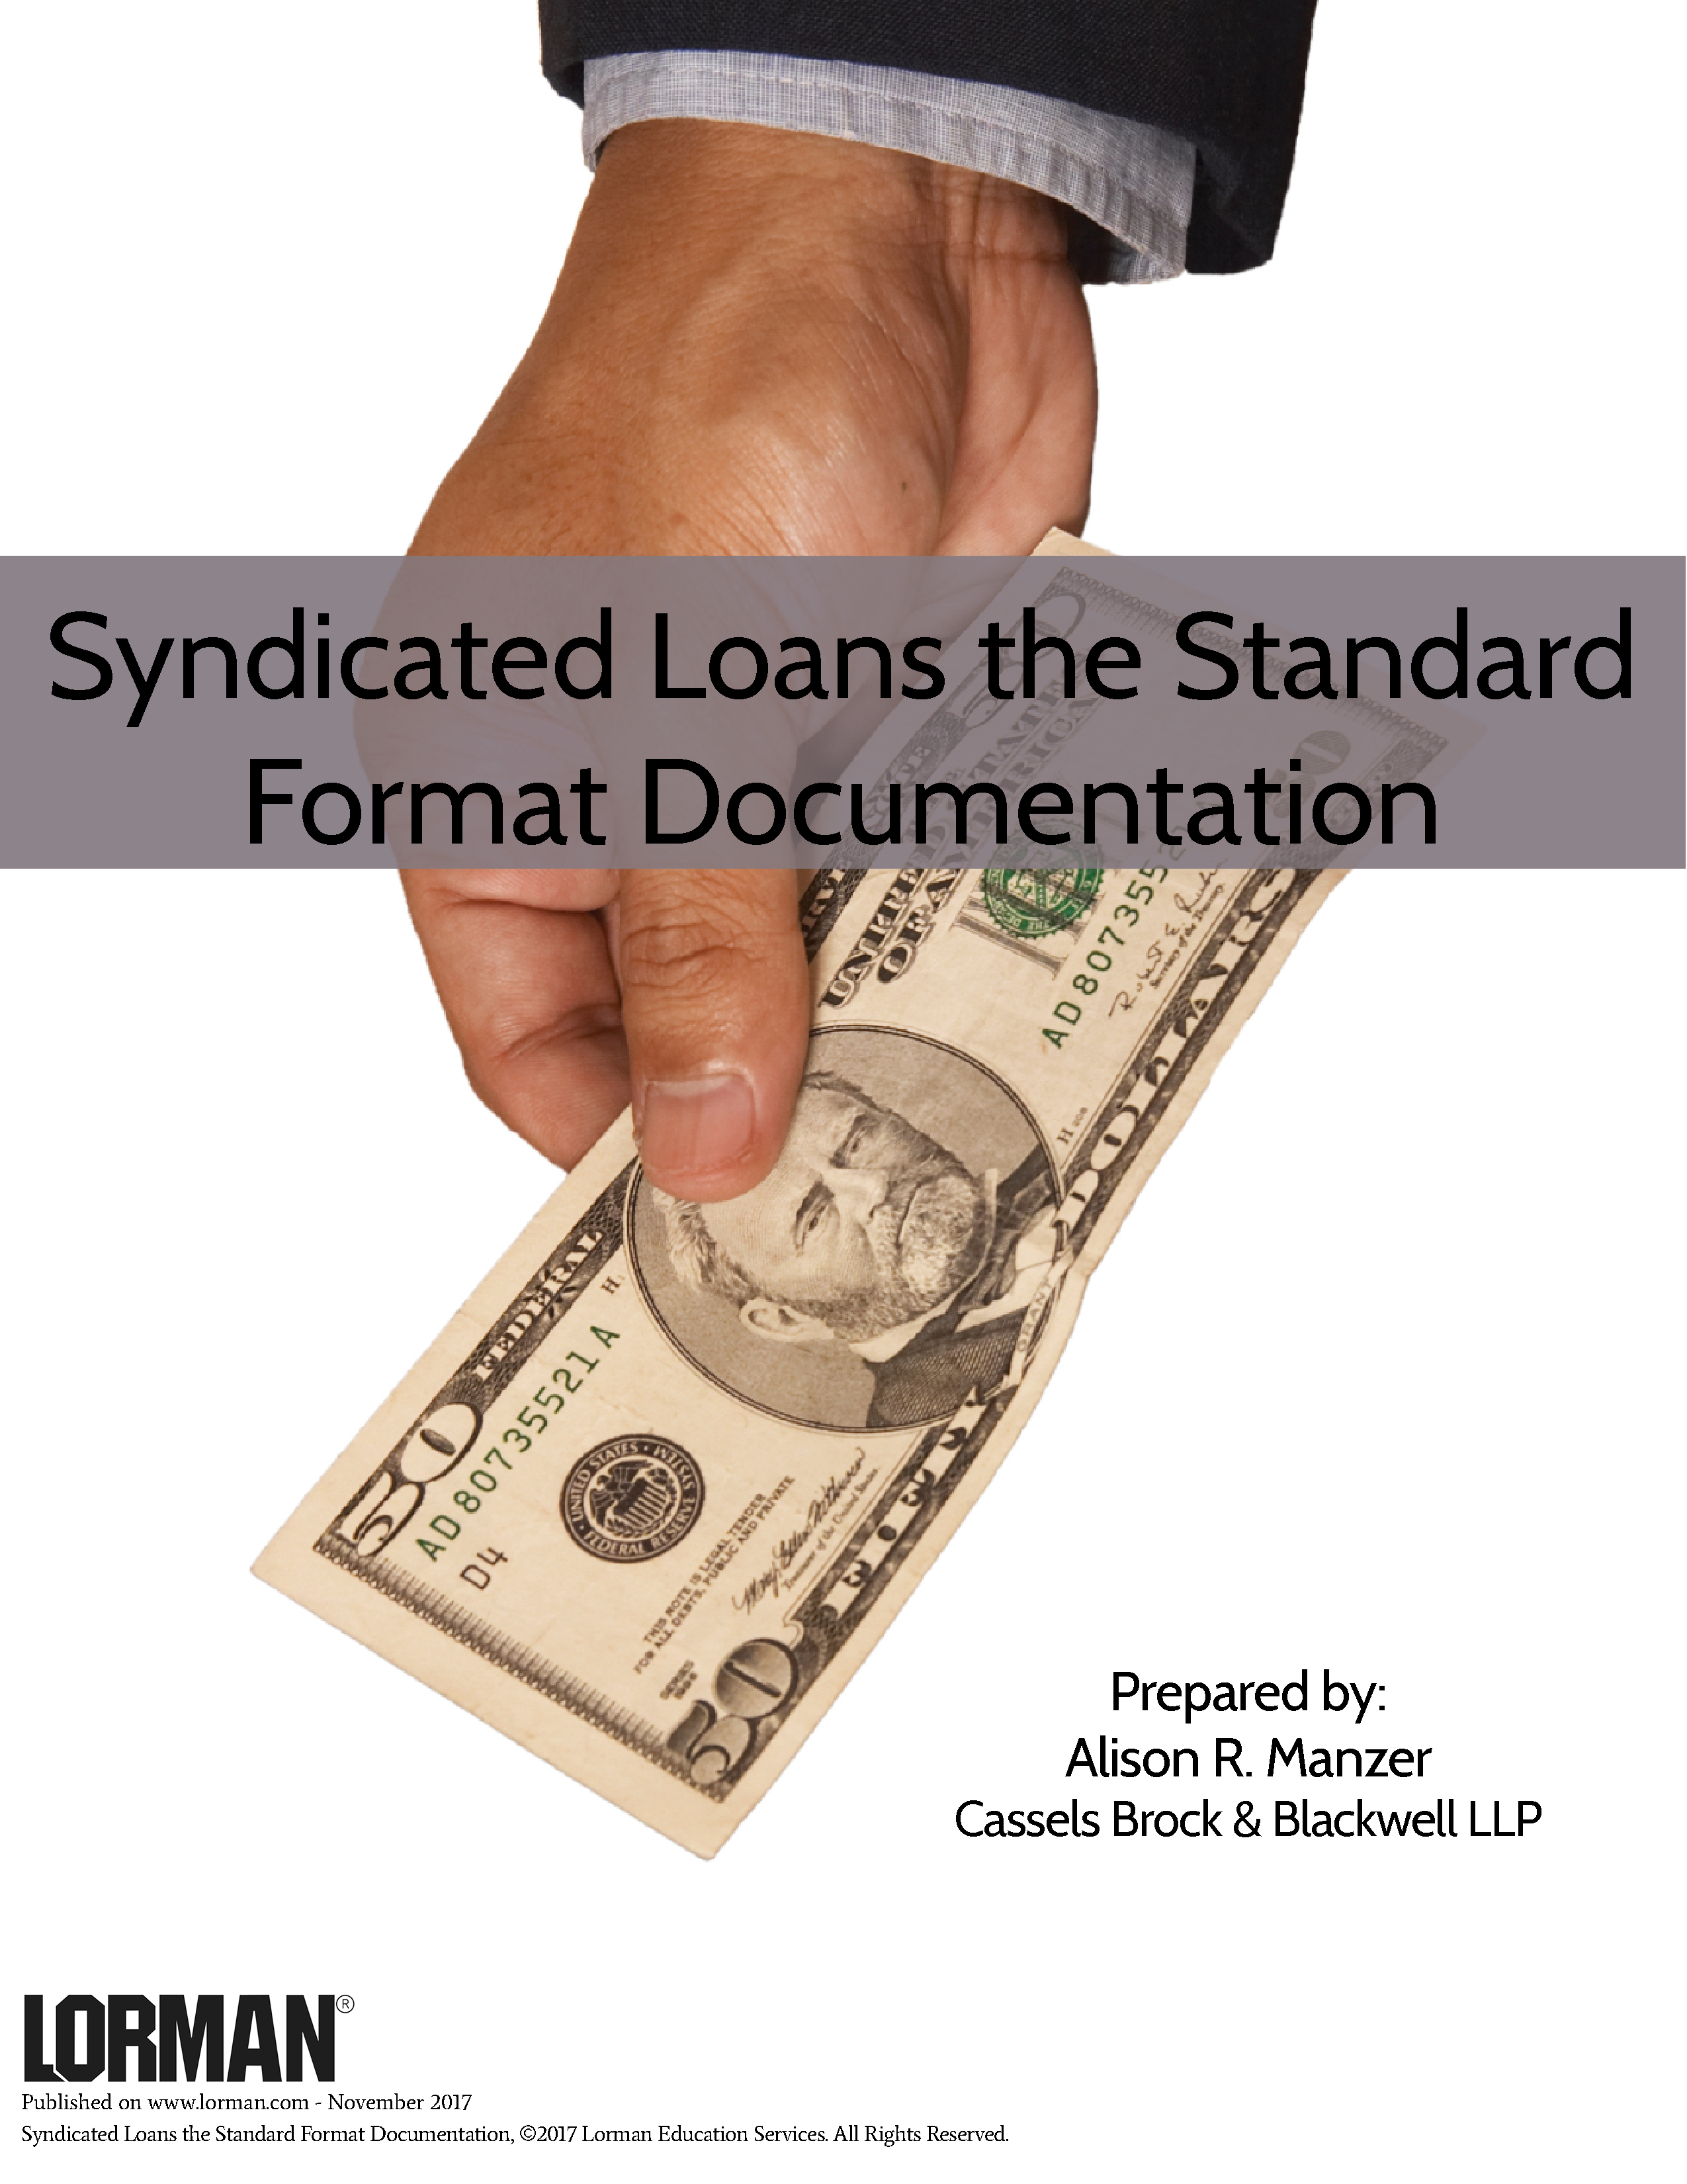 Syndicated Loans the Standard Format Documentation